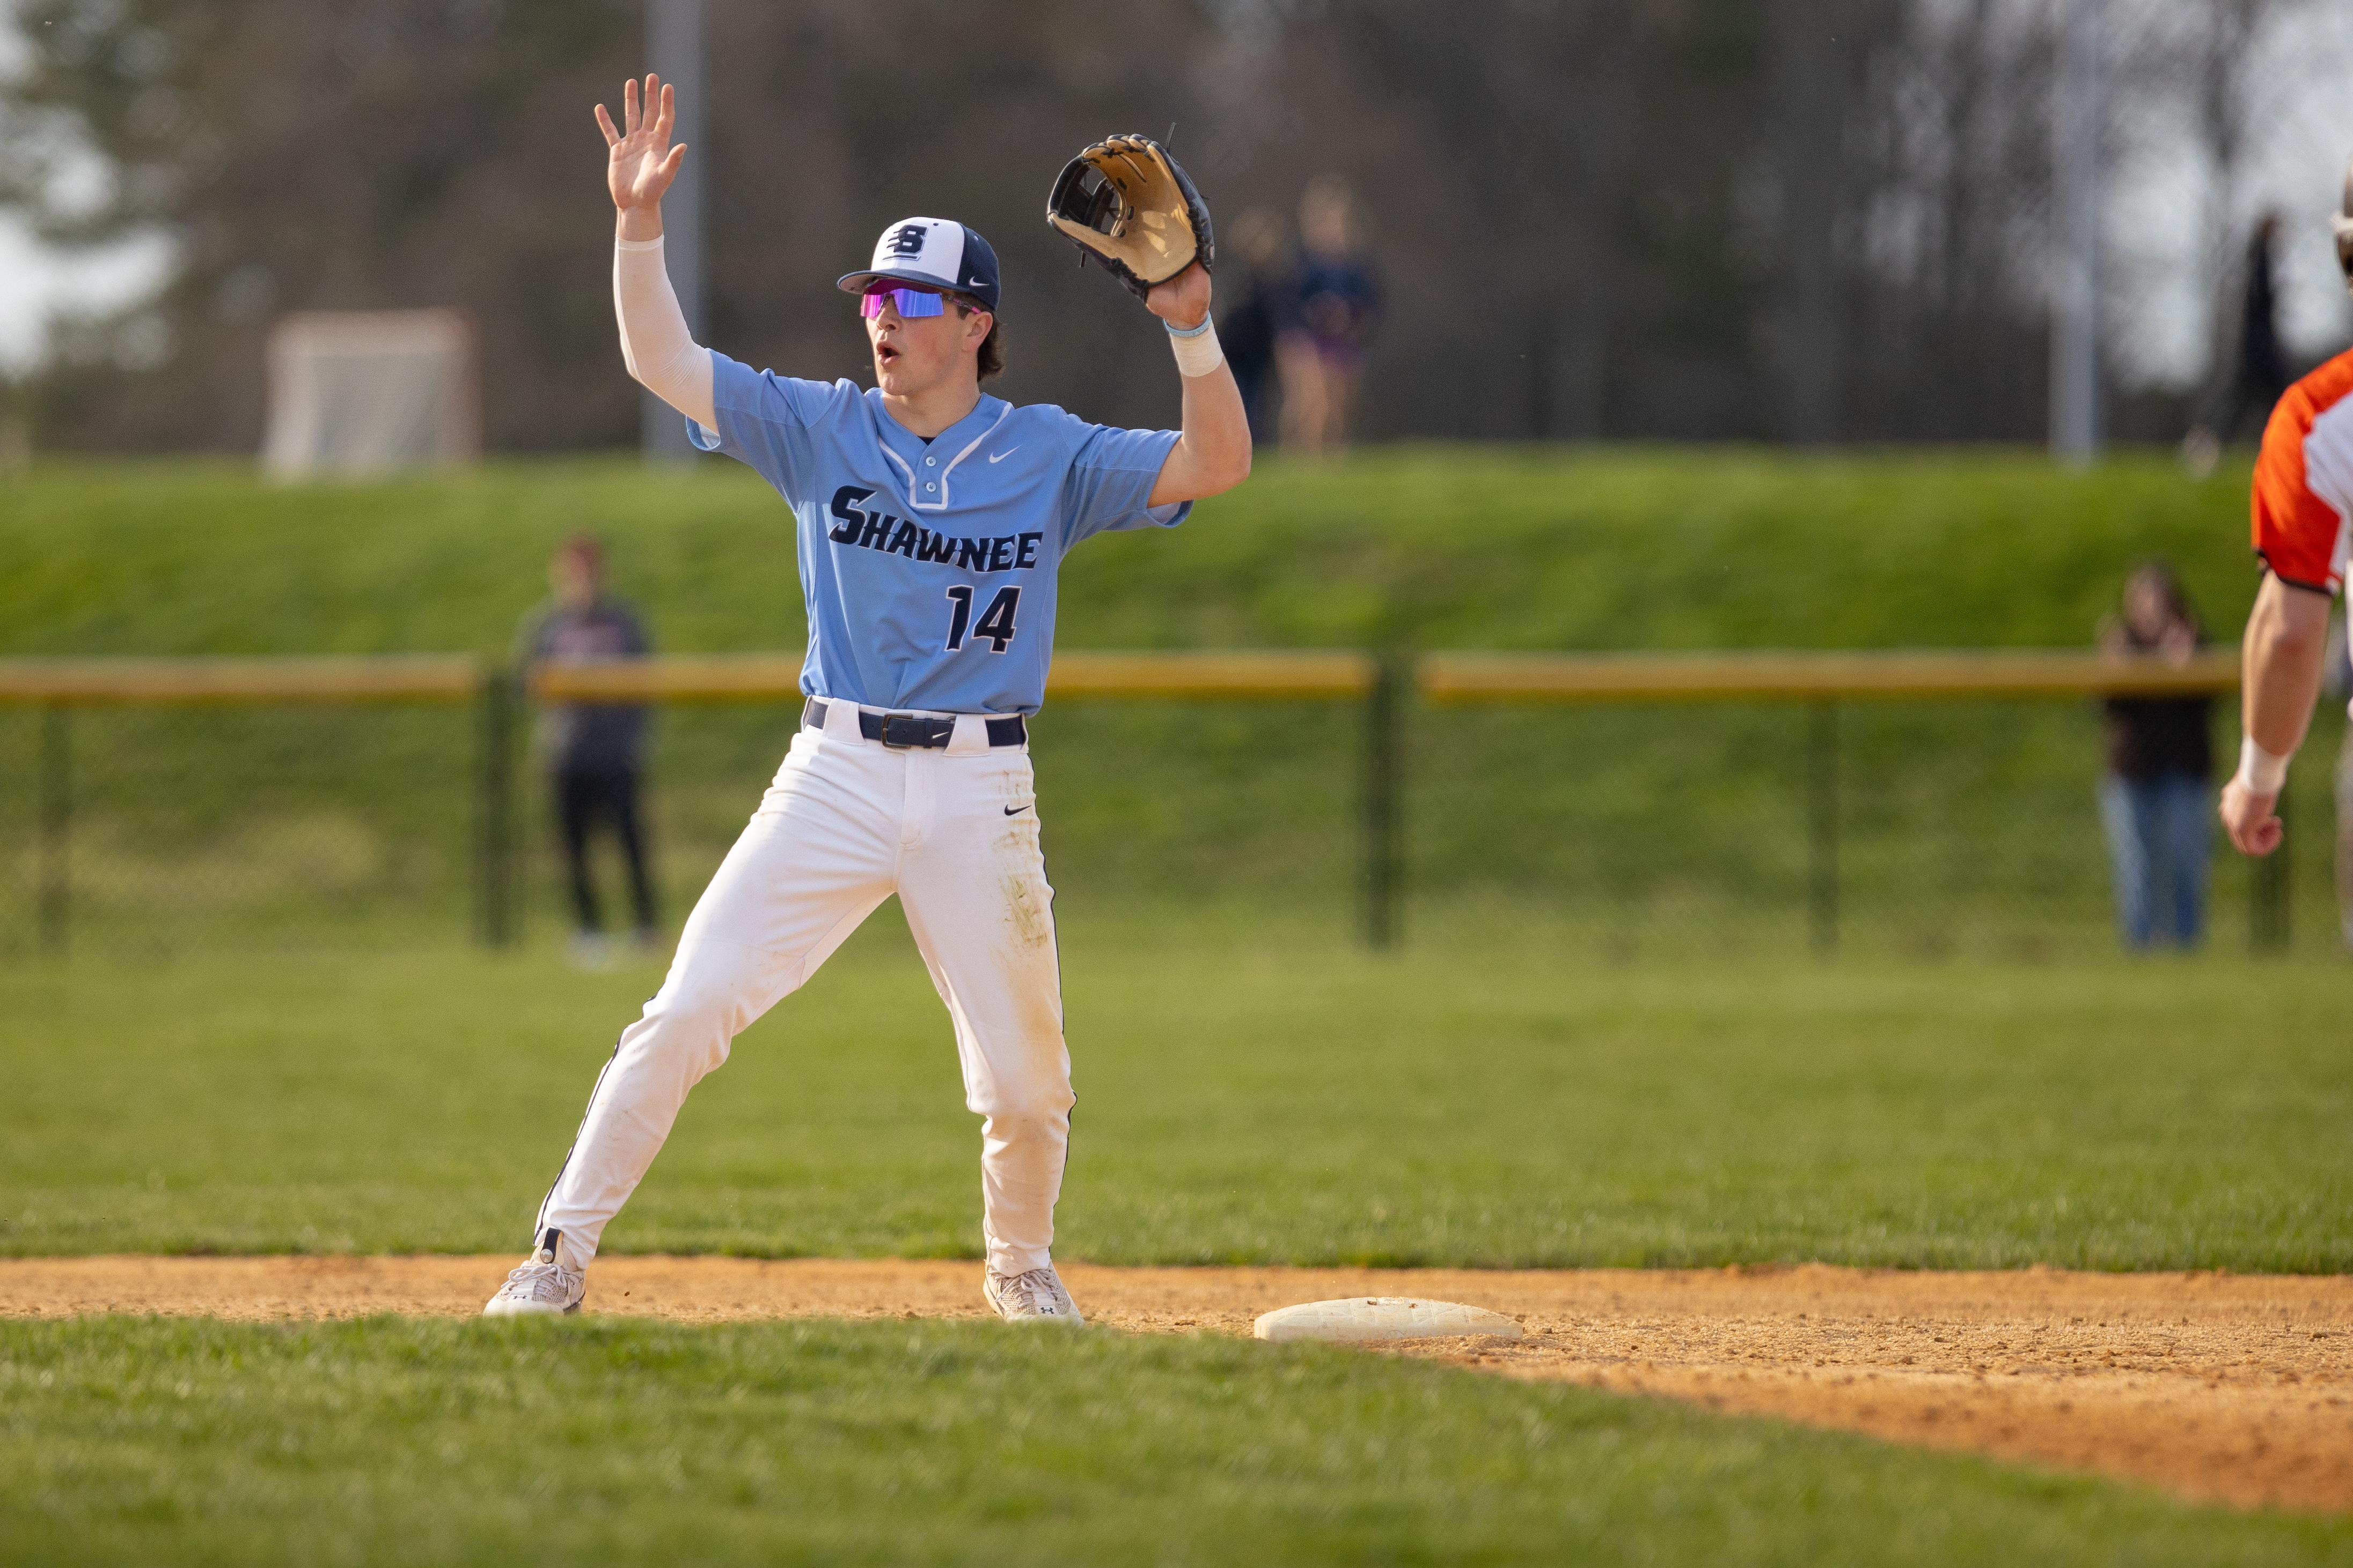 Reid Uccello (14) of Shawnee, signals no play at second in Marlton, NJ on Monday, April 3, 2023.